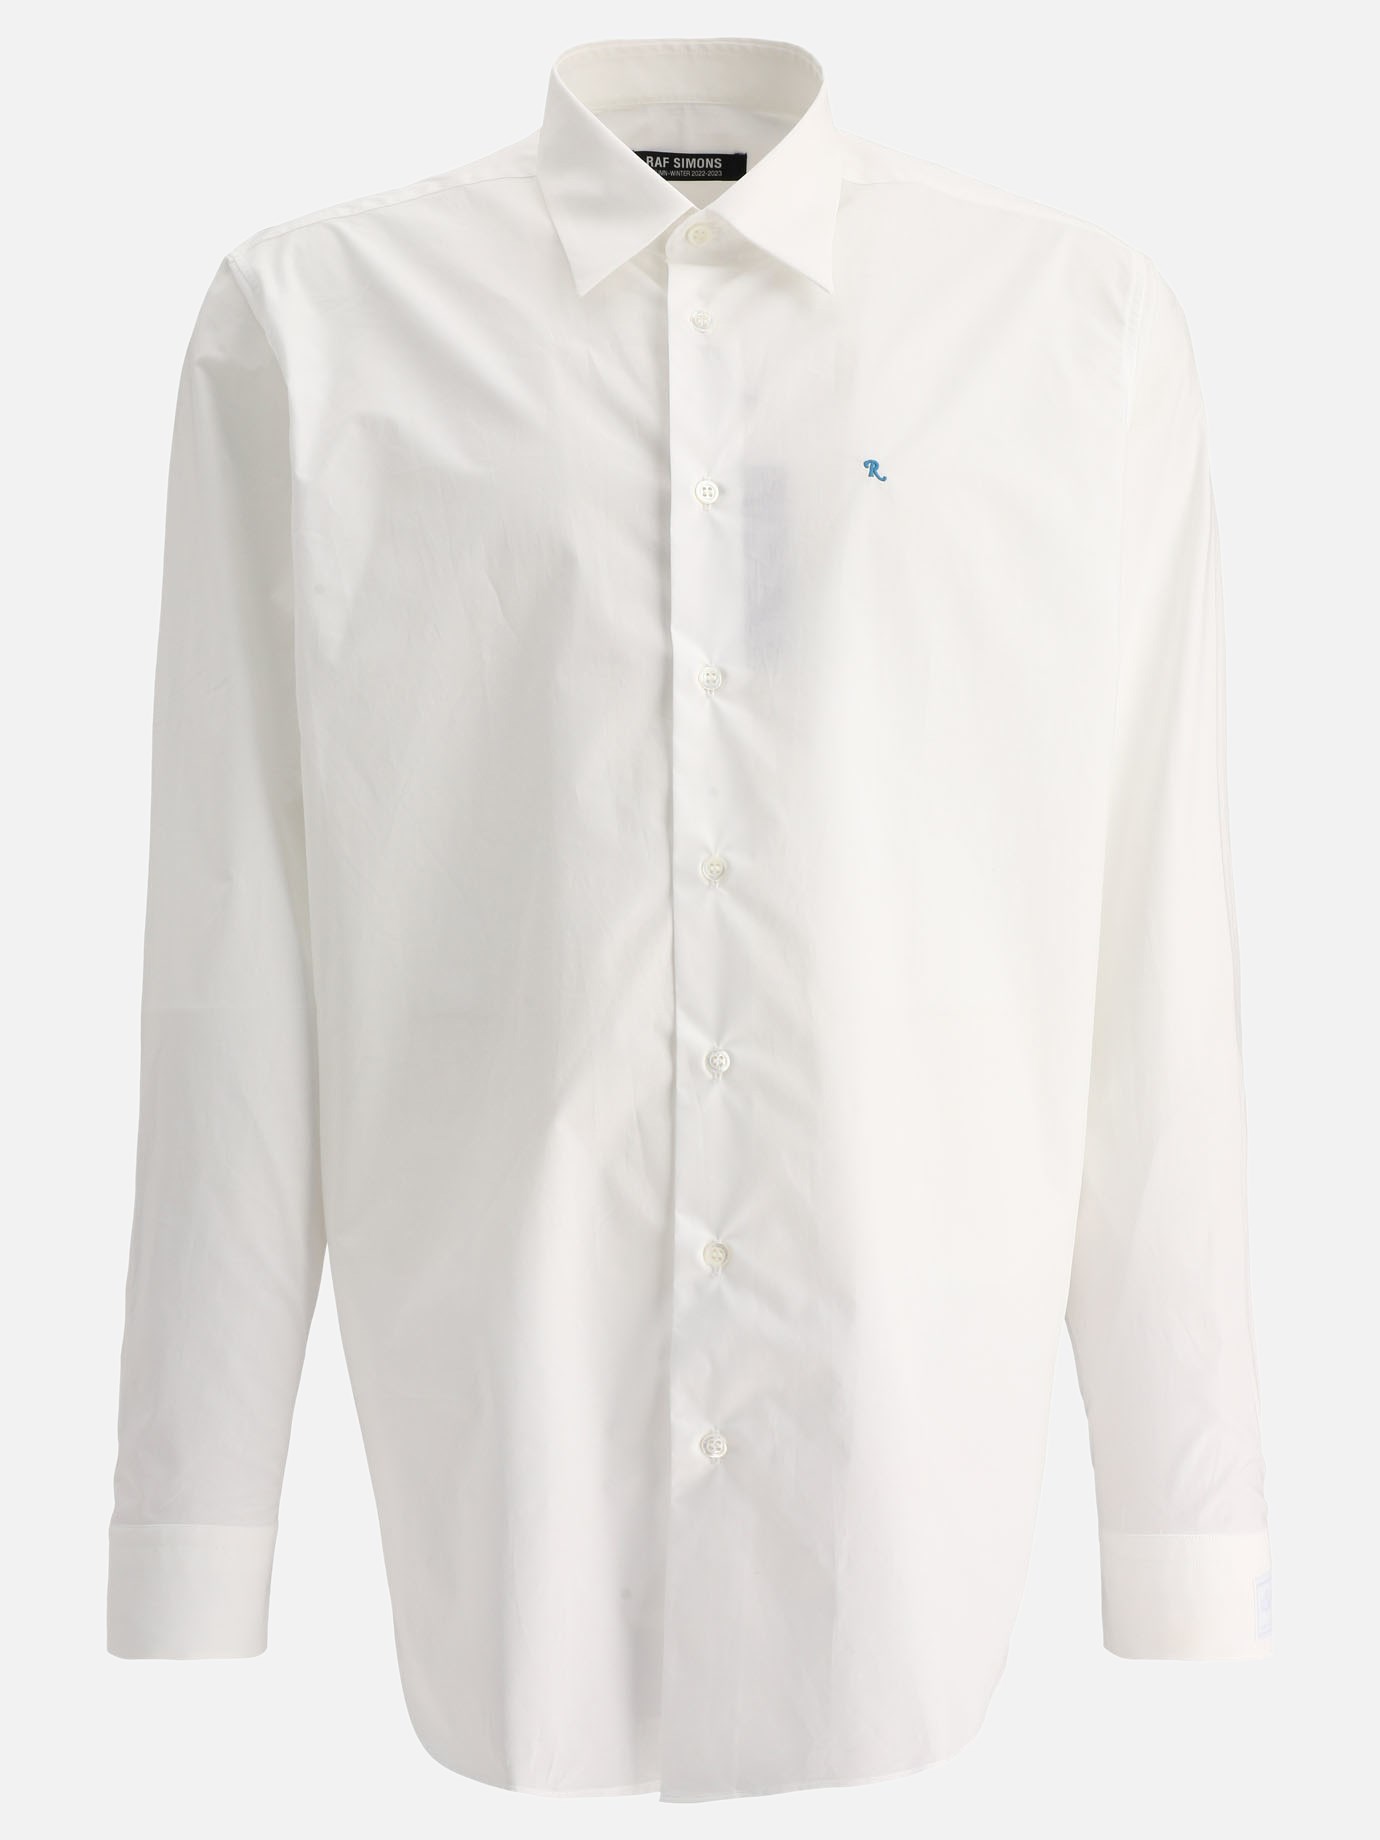 Classic shirt with embroidery